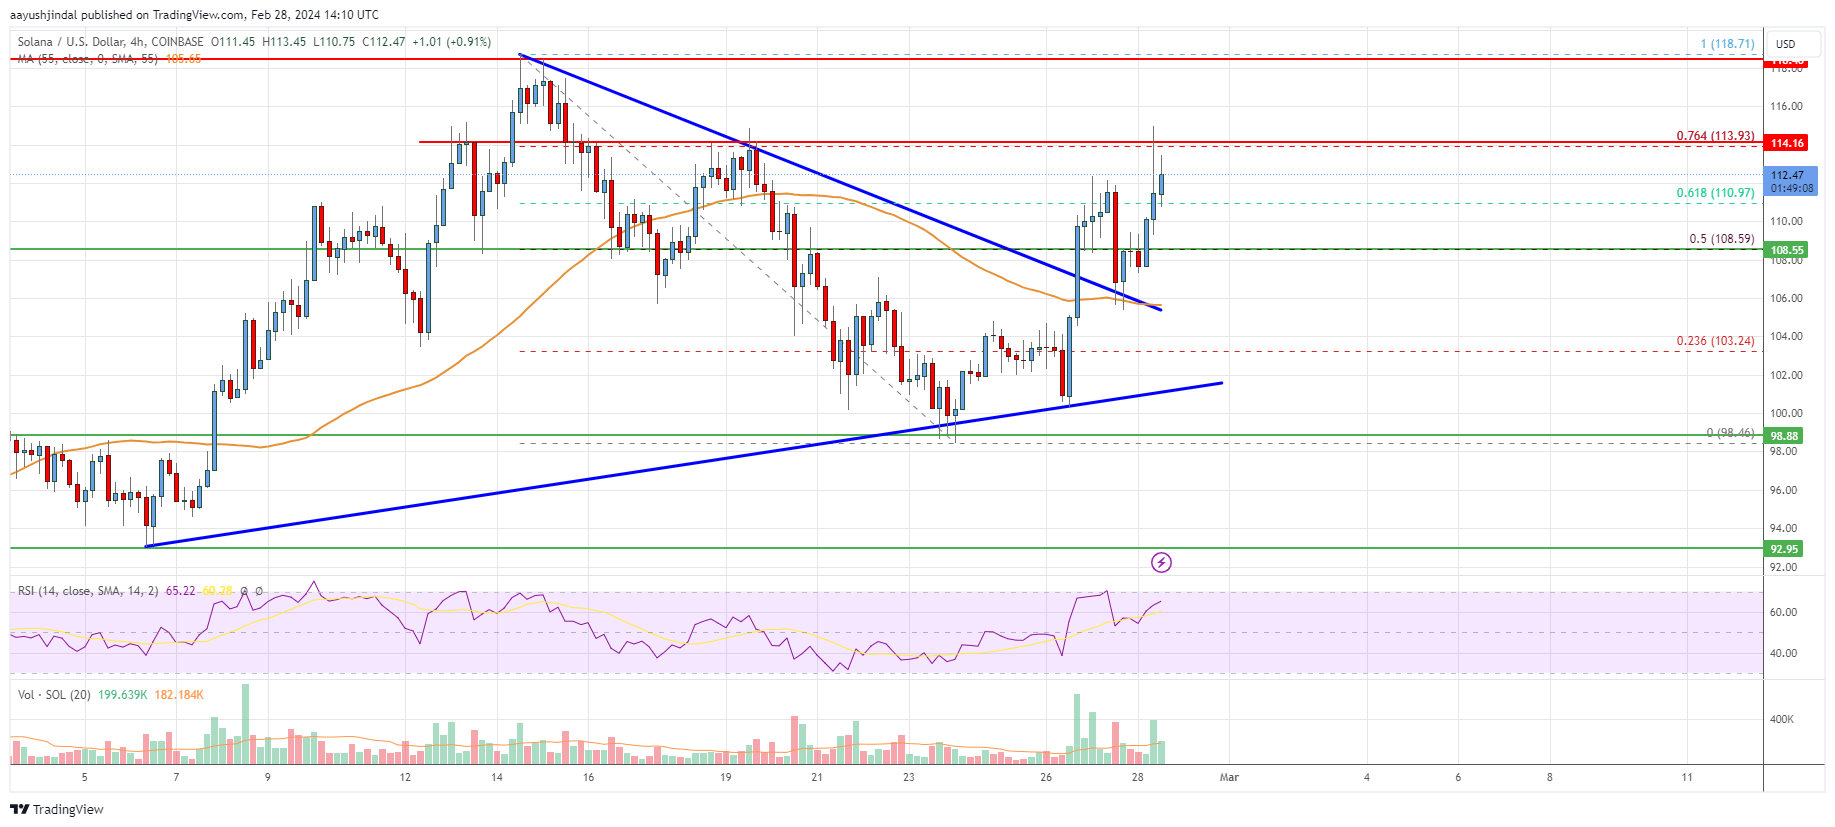 SOL Price Analysis: Solana Bulls Aim For $125 or Higher